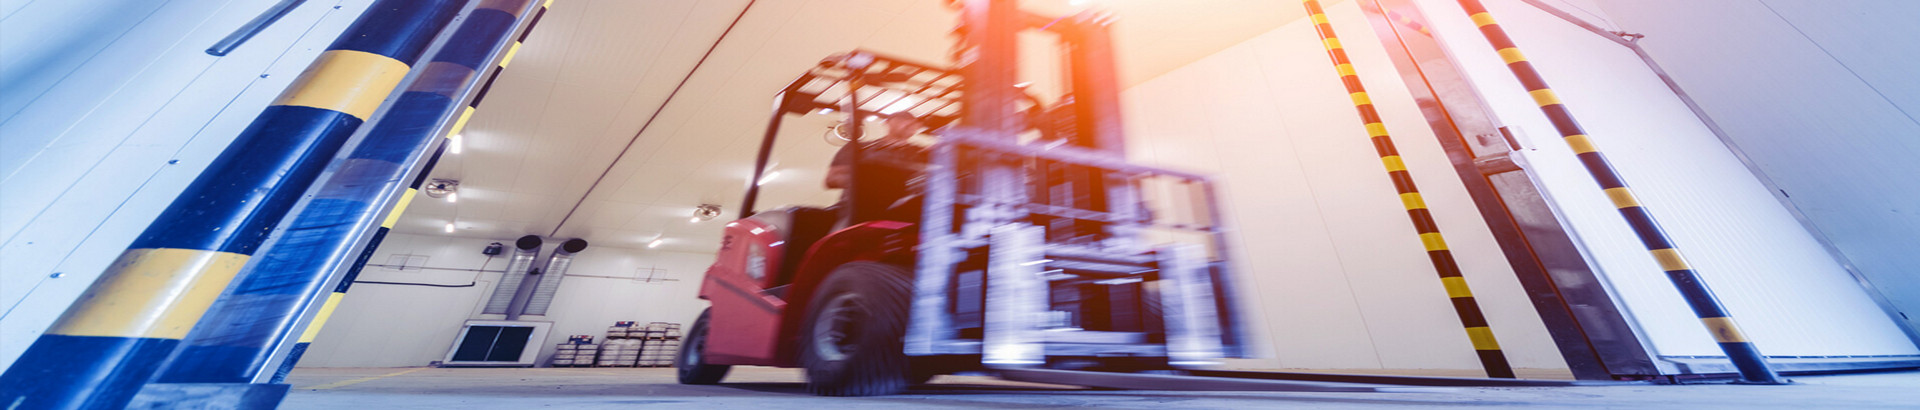 Introduction to Types of Forklifts